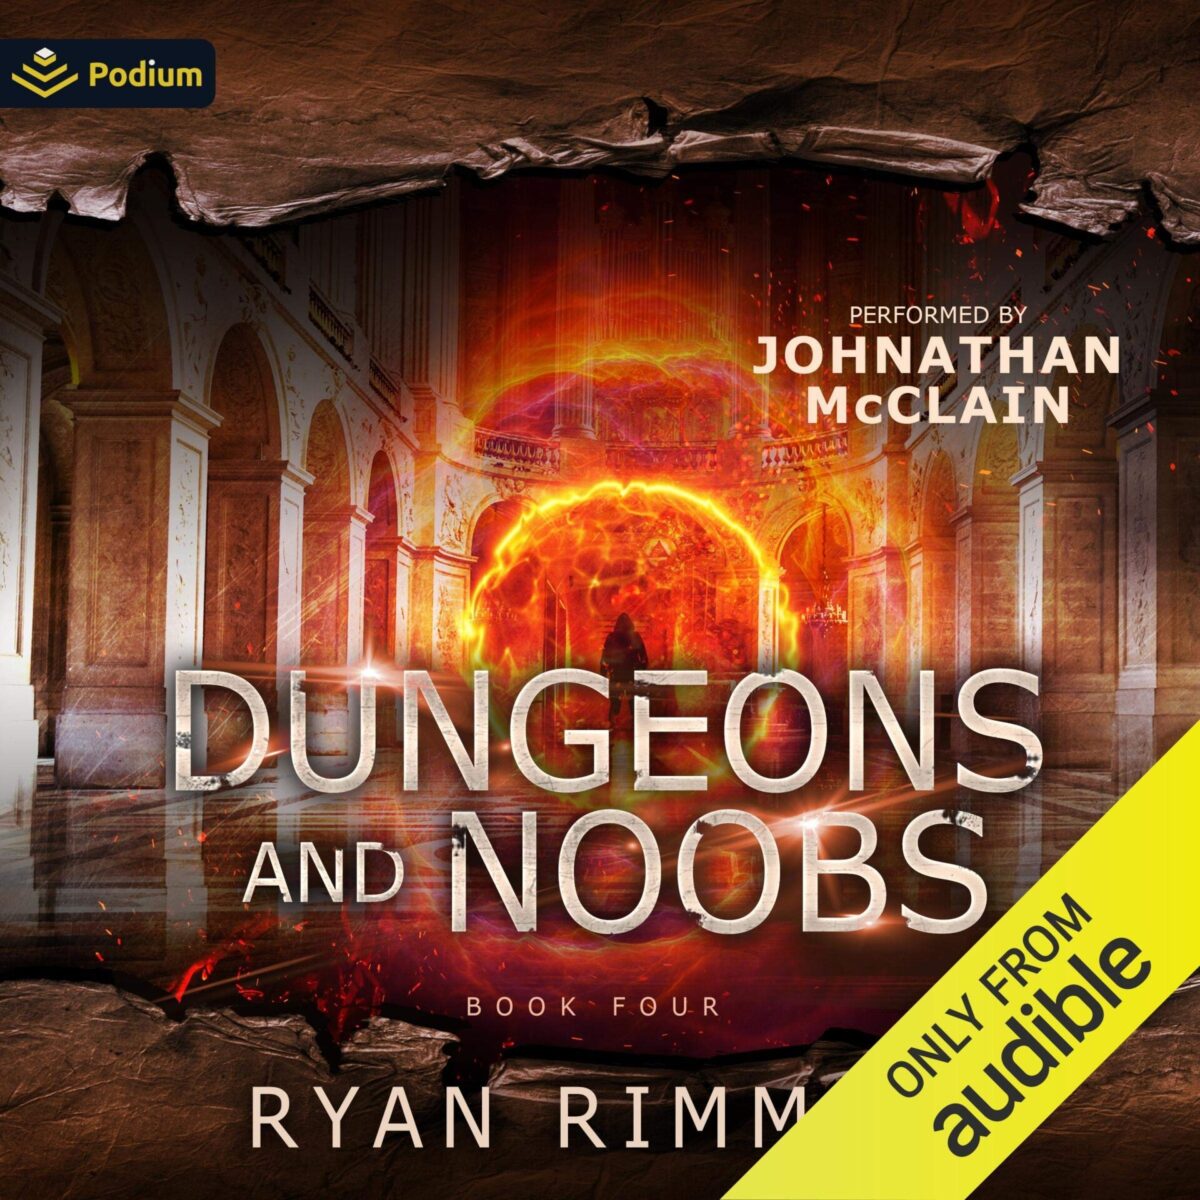 Dungeons and Noobs – The Audiobook Review